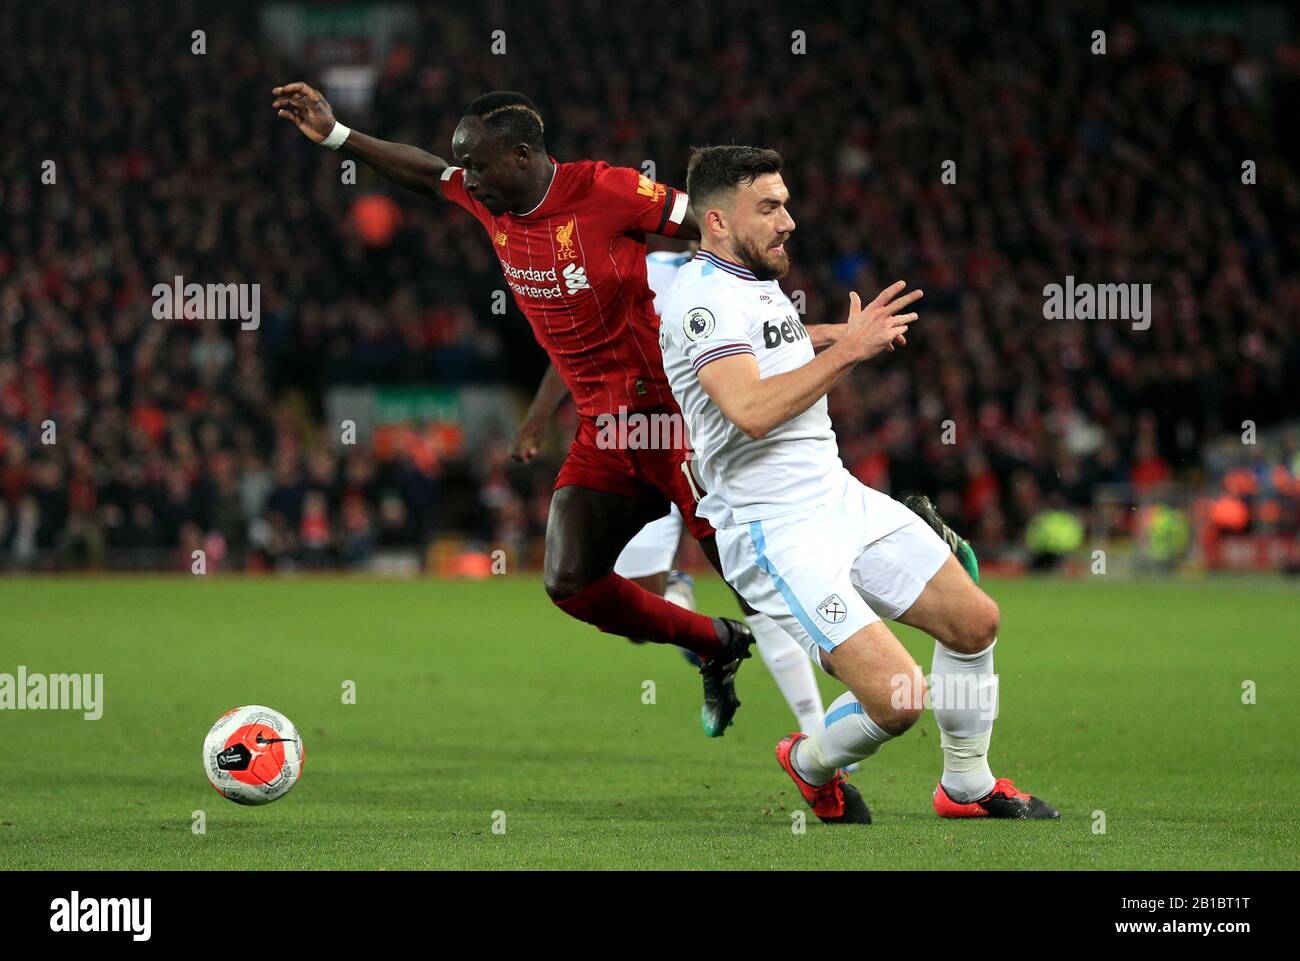 Liverpool's Sadio Mane (left) and West Ham United's Robert Snodgrass battle for the ball during the Premier League match at Anfield, Liverpool. Stock Photo